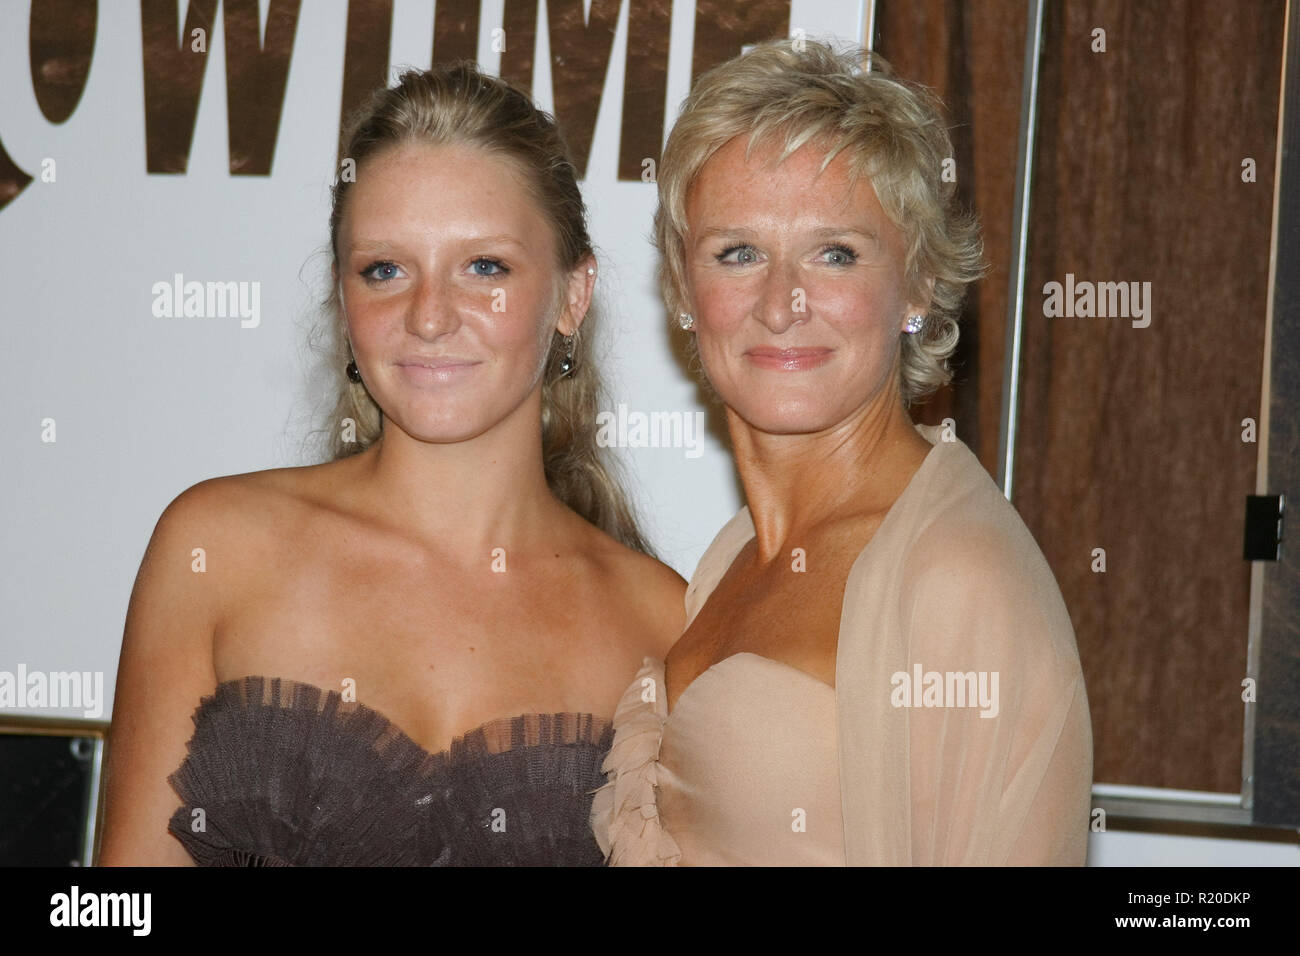 Annie Maude Starke, Glenn Close   09/19/04 The 56th Annual Primetime Emmy Awards - Showtime After Party  @ Morton's, Beverly Hills Photo by Kazumi Nakamoto/HNW / PictureLux  (September 19, 2004) Stock Photo